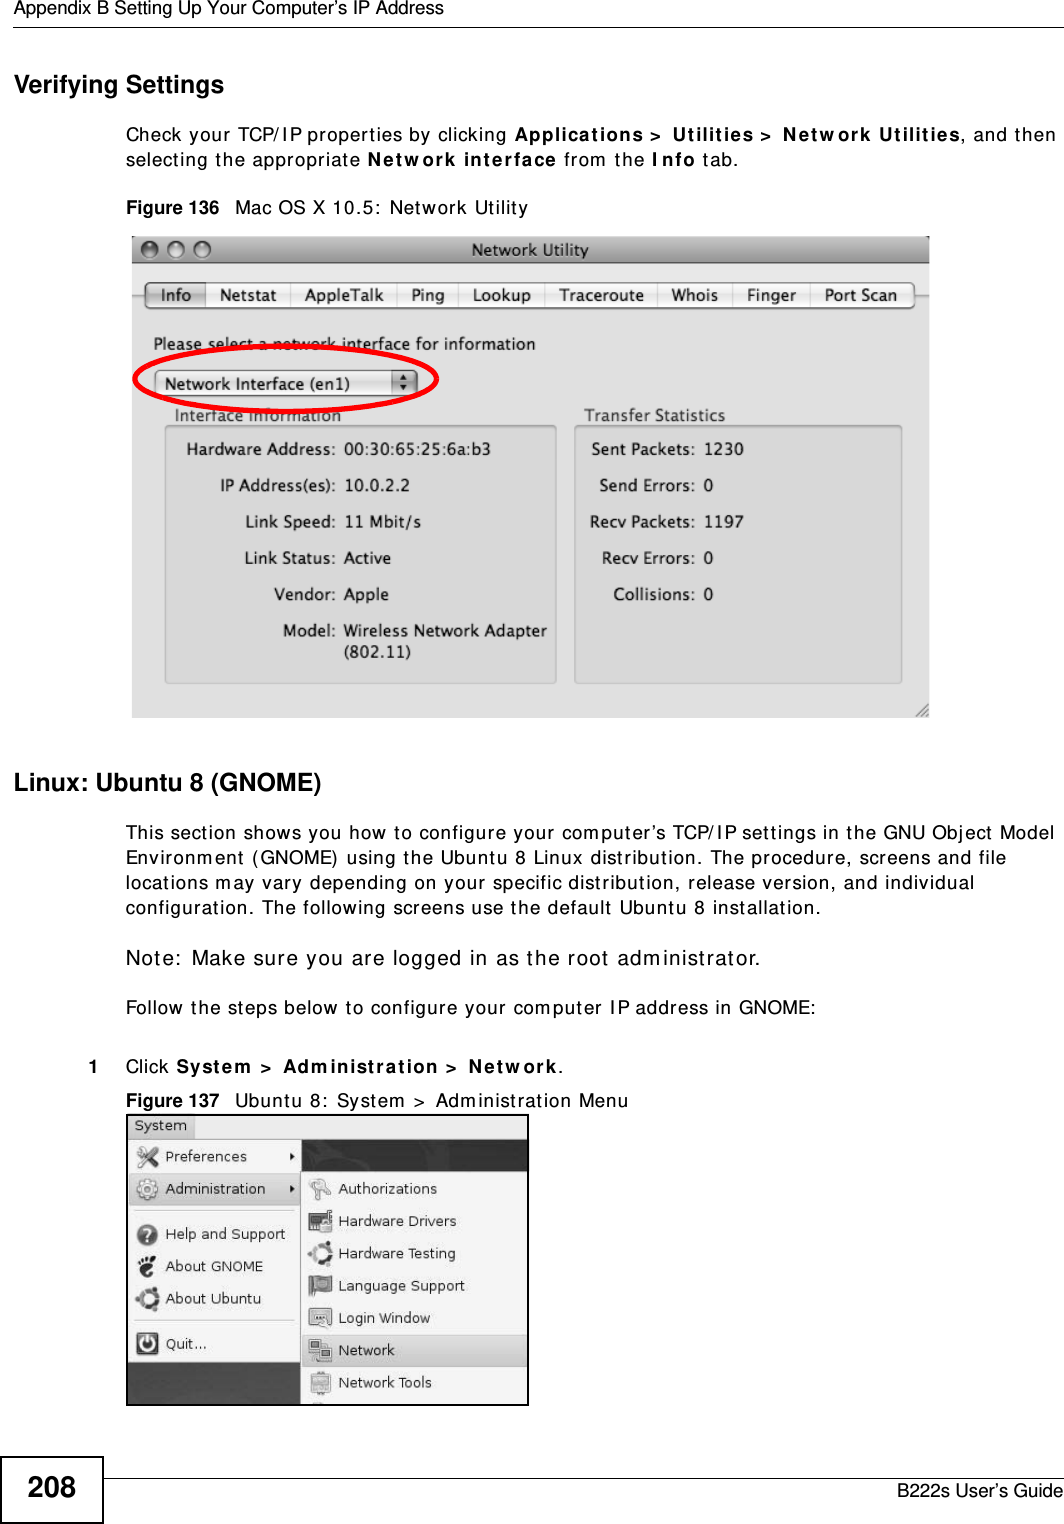 Appendix B Setting Up Your Computer’s IP AddressB222s User’s Guide208Verifying SettingsCheck your  TCP/ IP propert ies by clicking Applicat ions &gt;  Ut ilit ies &gt;  N e t w ork  Ut ilit ies, and t hen select ing t he appropriat e N et w or k in t er face from  the I nfo tab.Figure 136   Mac OS X 10.5:  Network Ut ilit yLinux: Ubuntu 8 (GNOME)This sect ion shows you how to configure your com put er ’s TCP/ I P set tings in t he GNU Object Model Environm ent ( GNOME) using t he Ubunt u 8 Linux dist ribut ion. The pr ocedur e, screens and file locations m ay vary depending on your specific distribut ion, release version, and individual configurat ion. The following screens use t he default Ubuntu 8 inst allat ion.Not e:  Make sure you are logged in as the root  adm inistrat or. Follow t he steps below t o configure your  com puter I P address in GNOME:  1Click System  &gt;  Adm inist ra t ion &gt;  N e t w ork .Figure 137   Ubunt u 8:  System  &gt;  Adm inistrat ion Menu